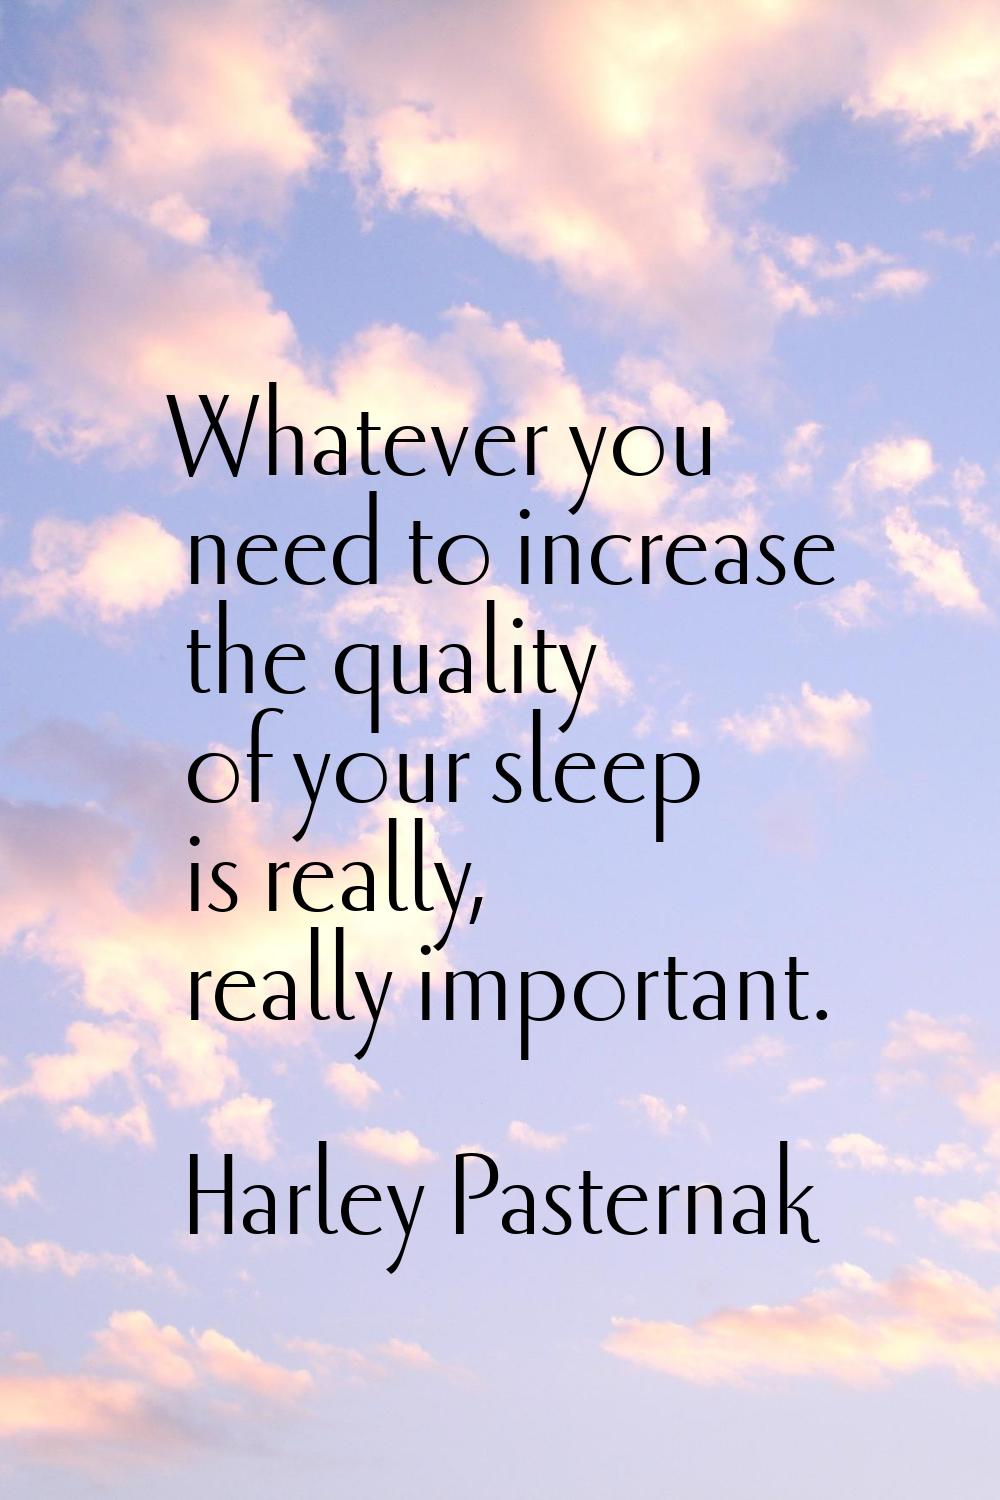 Whatever you need to increase the quality of your sleep is really, really important.